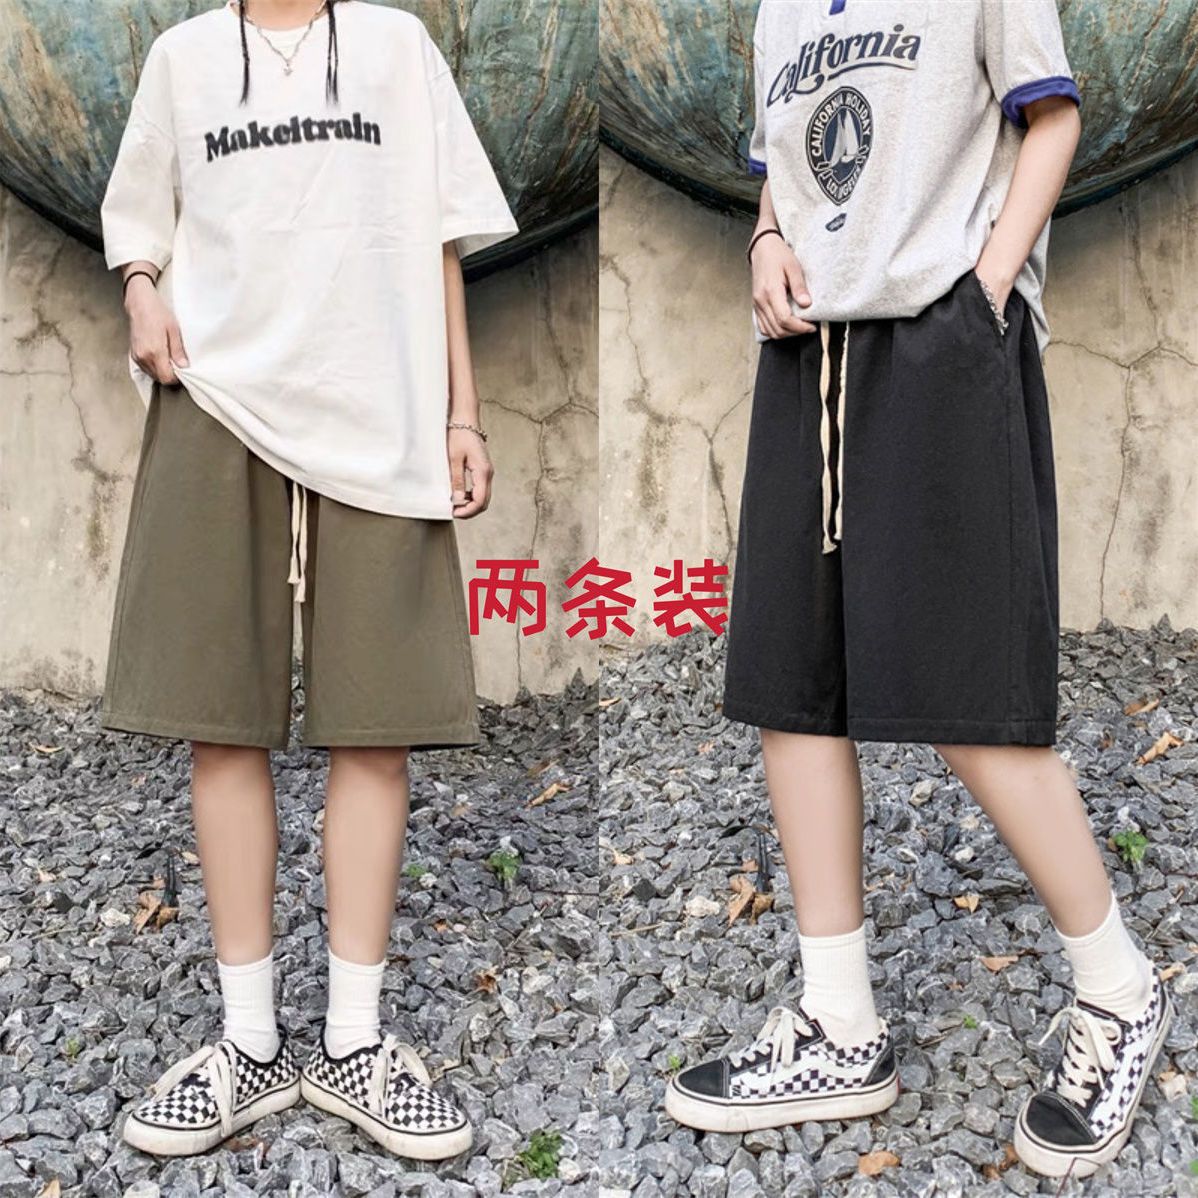 Two-piece quick-drying shorts men's five-point pants summer trend solid color large size straight loose loose all-match overalls